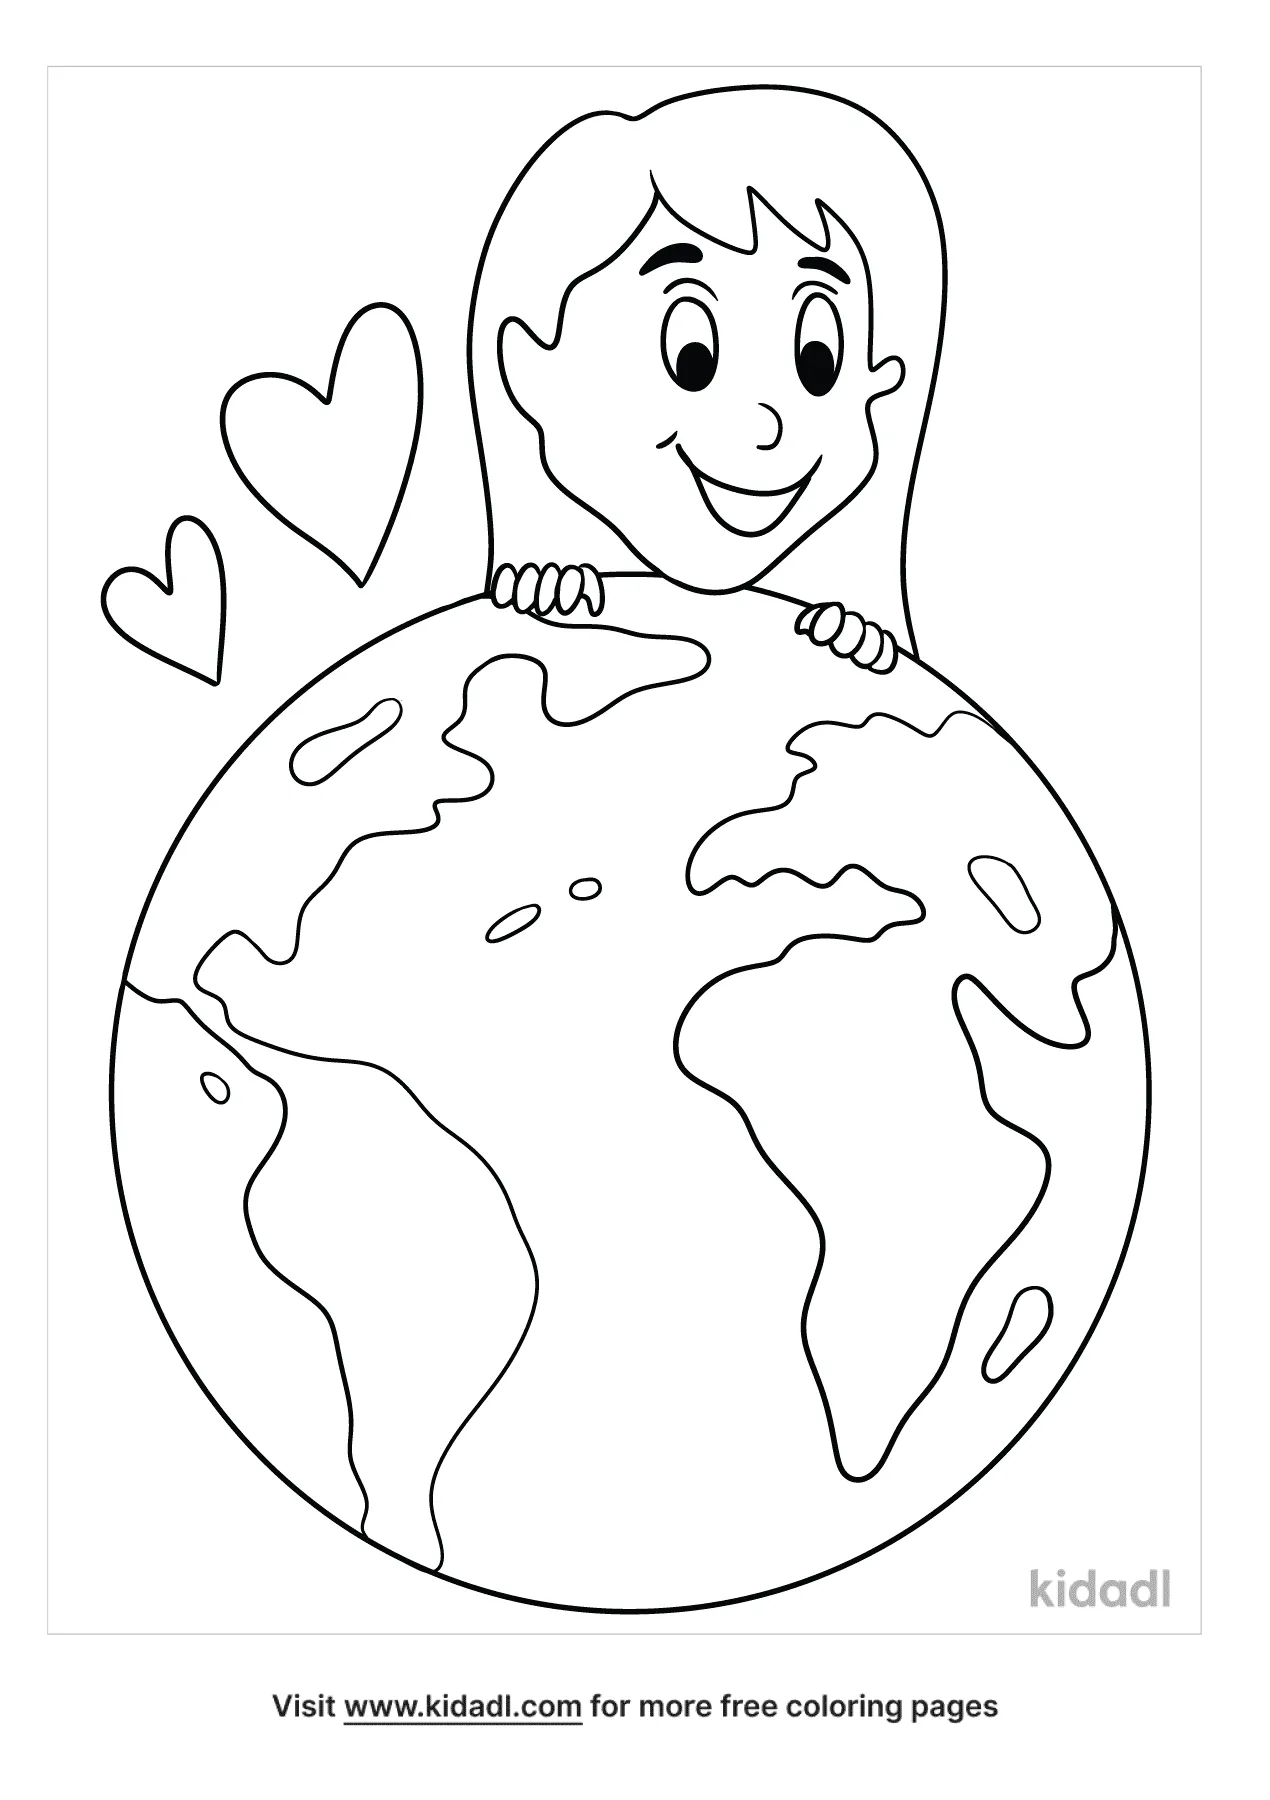 One Earth Children Coloring Page